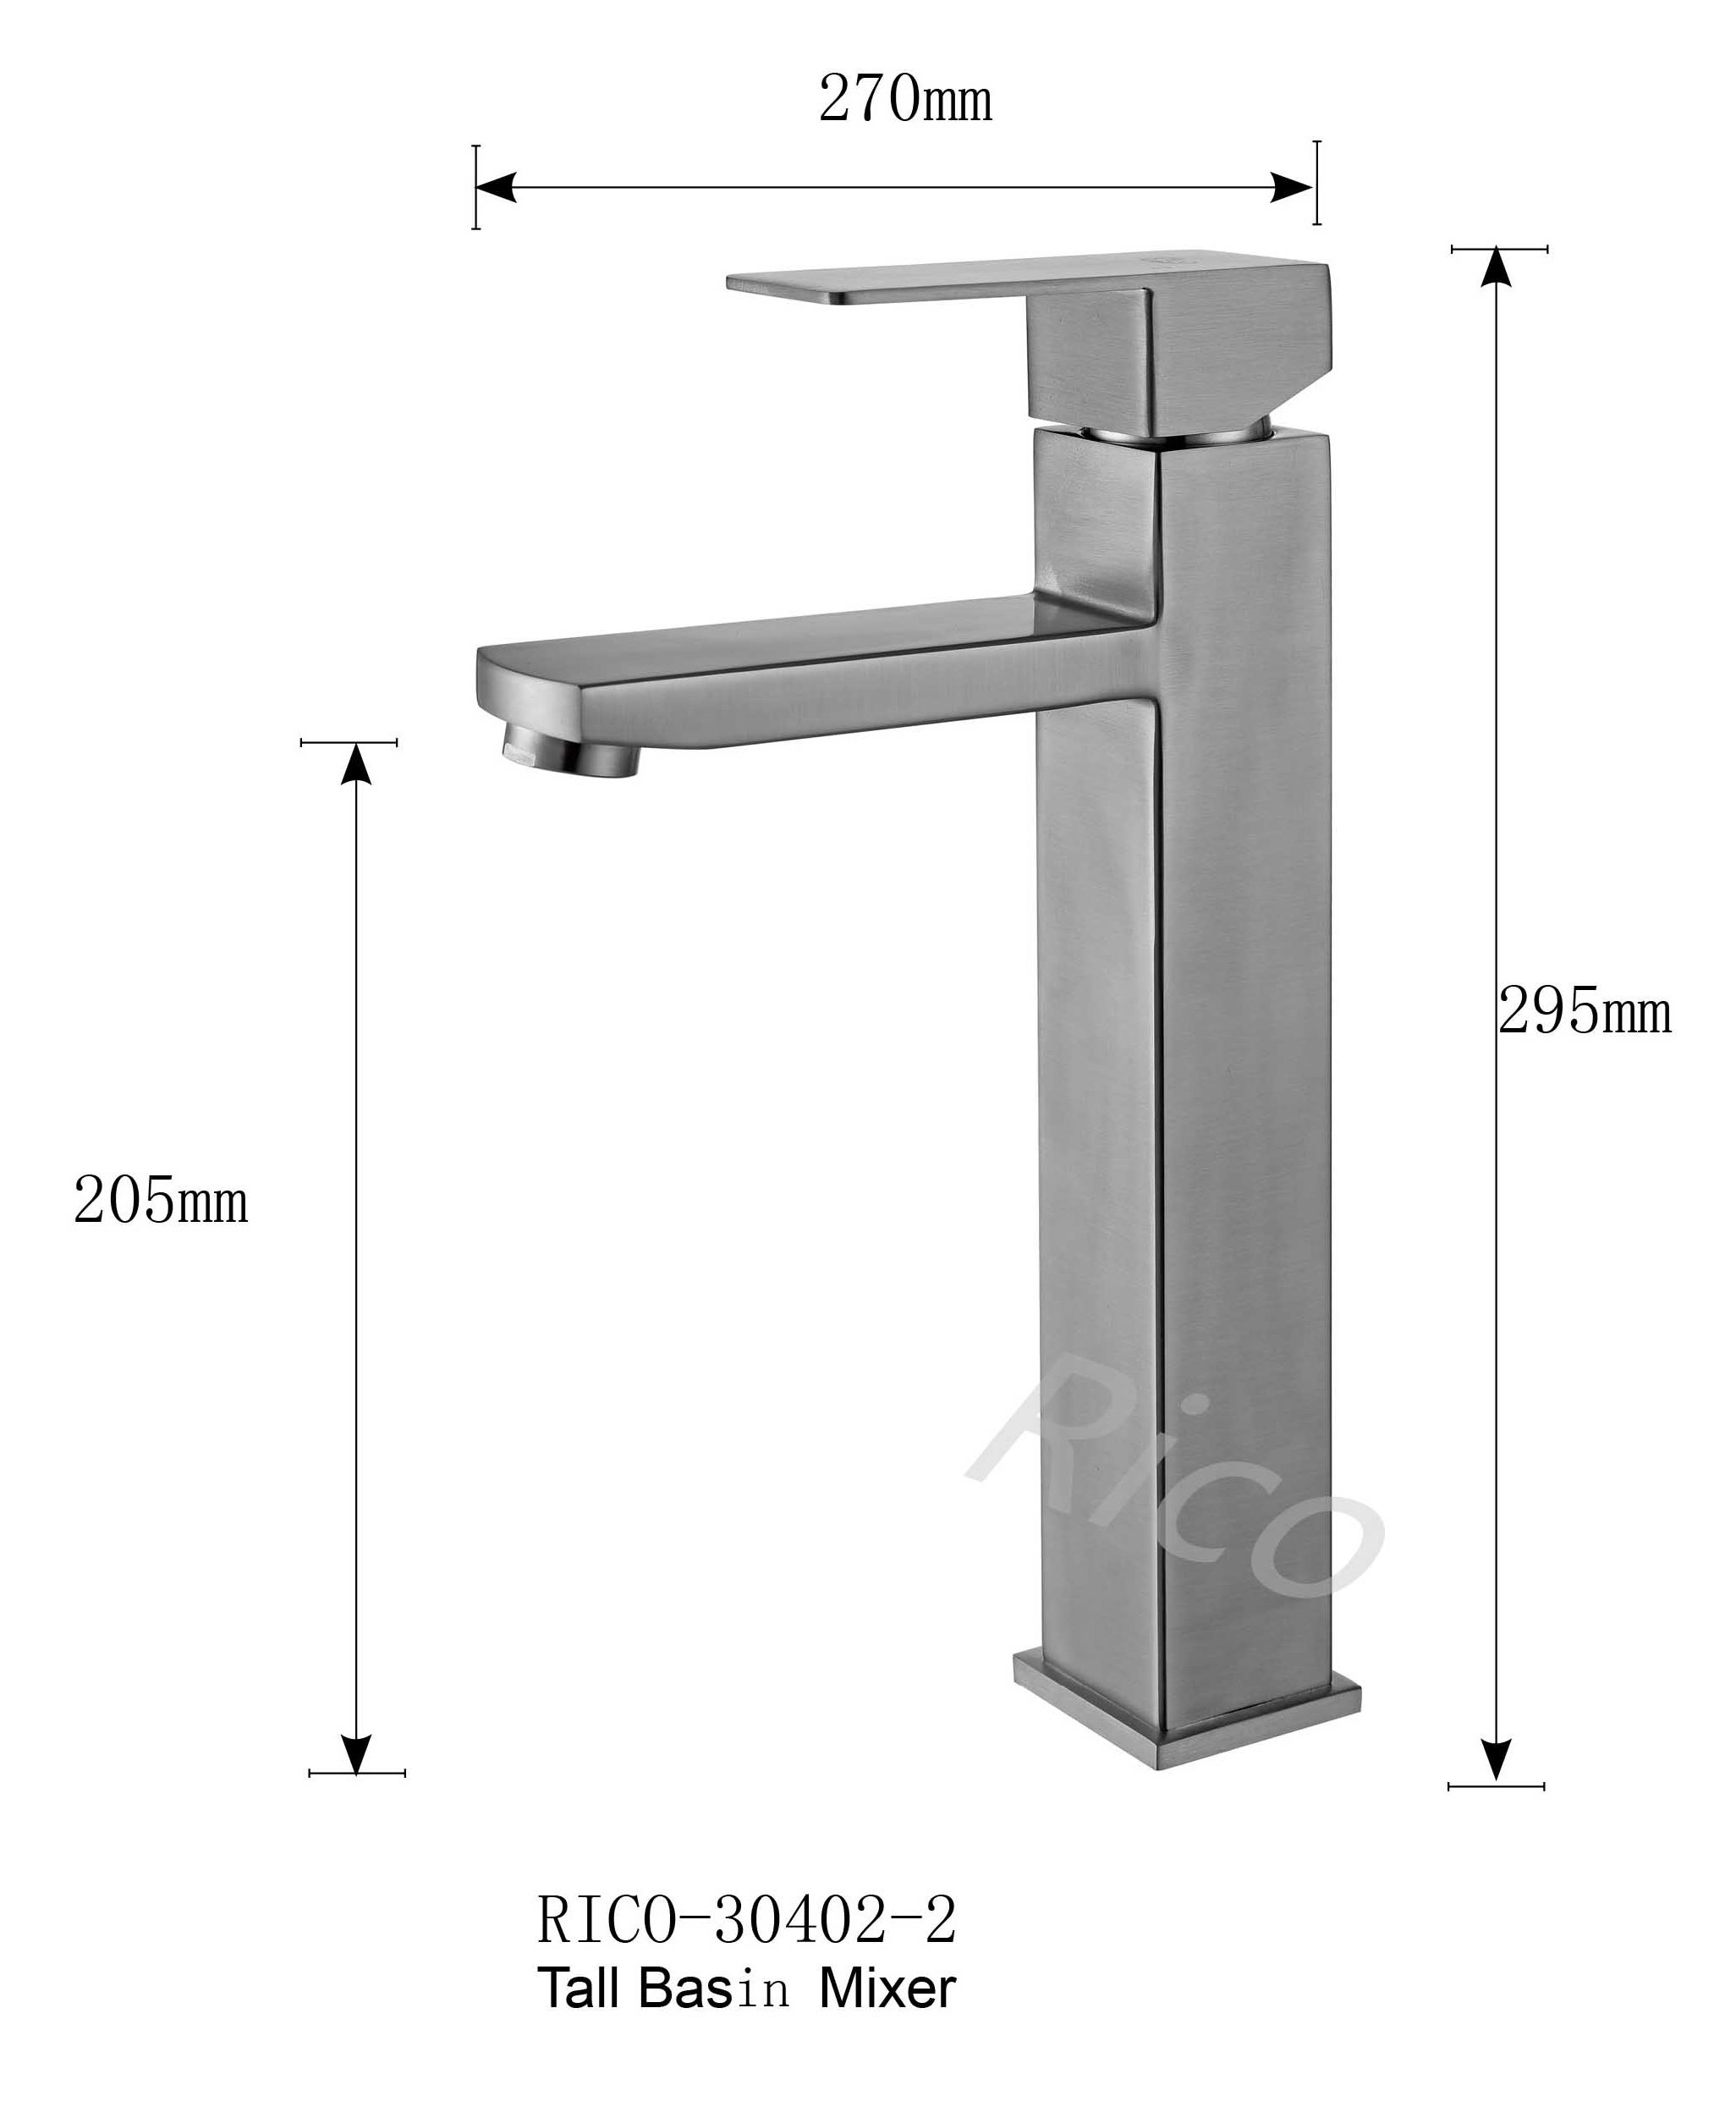 Rico : Stainless Steel Tall Basin Mixer – RICO-30402-2